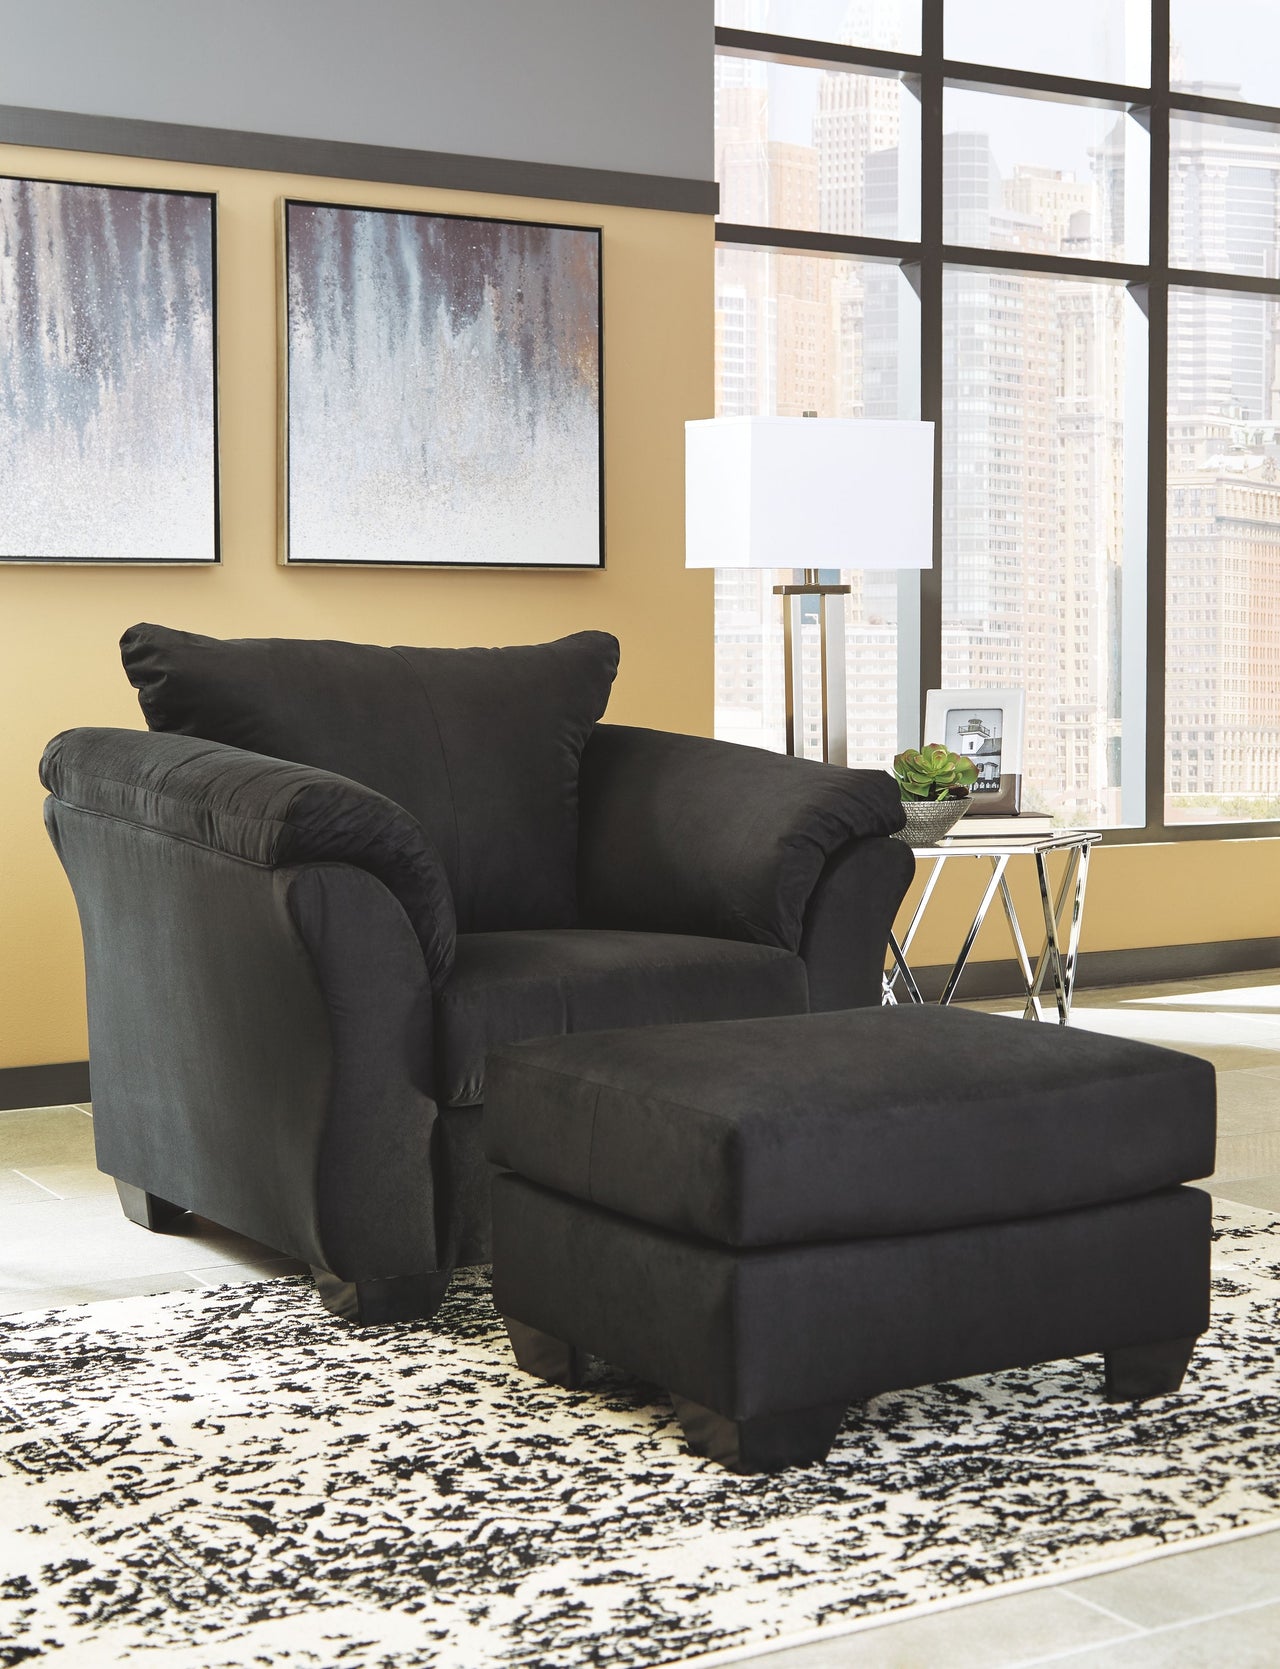 Darcy - Chair With Ottoman - Tony's Home Furnishings